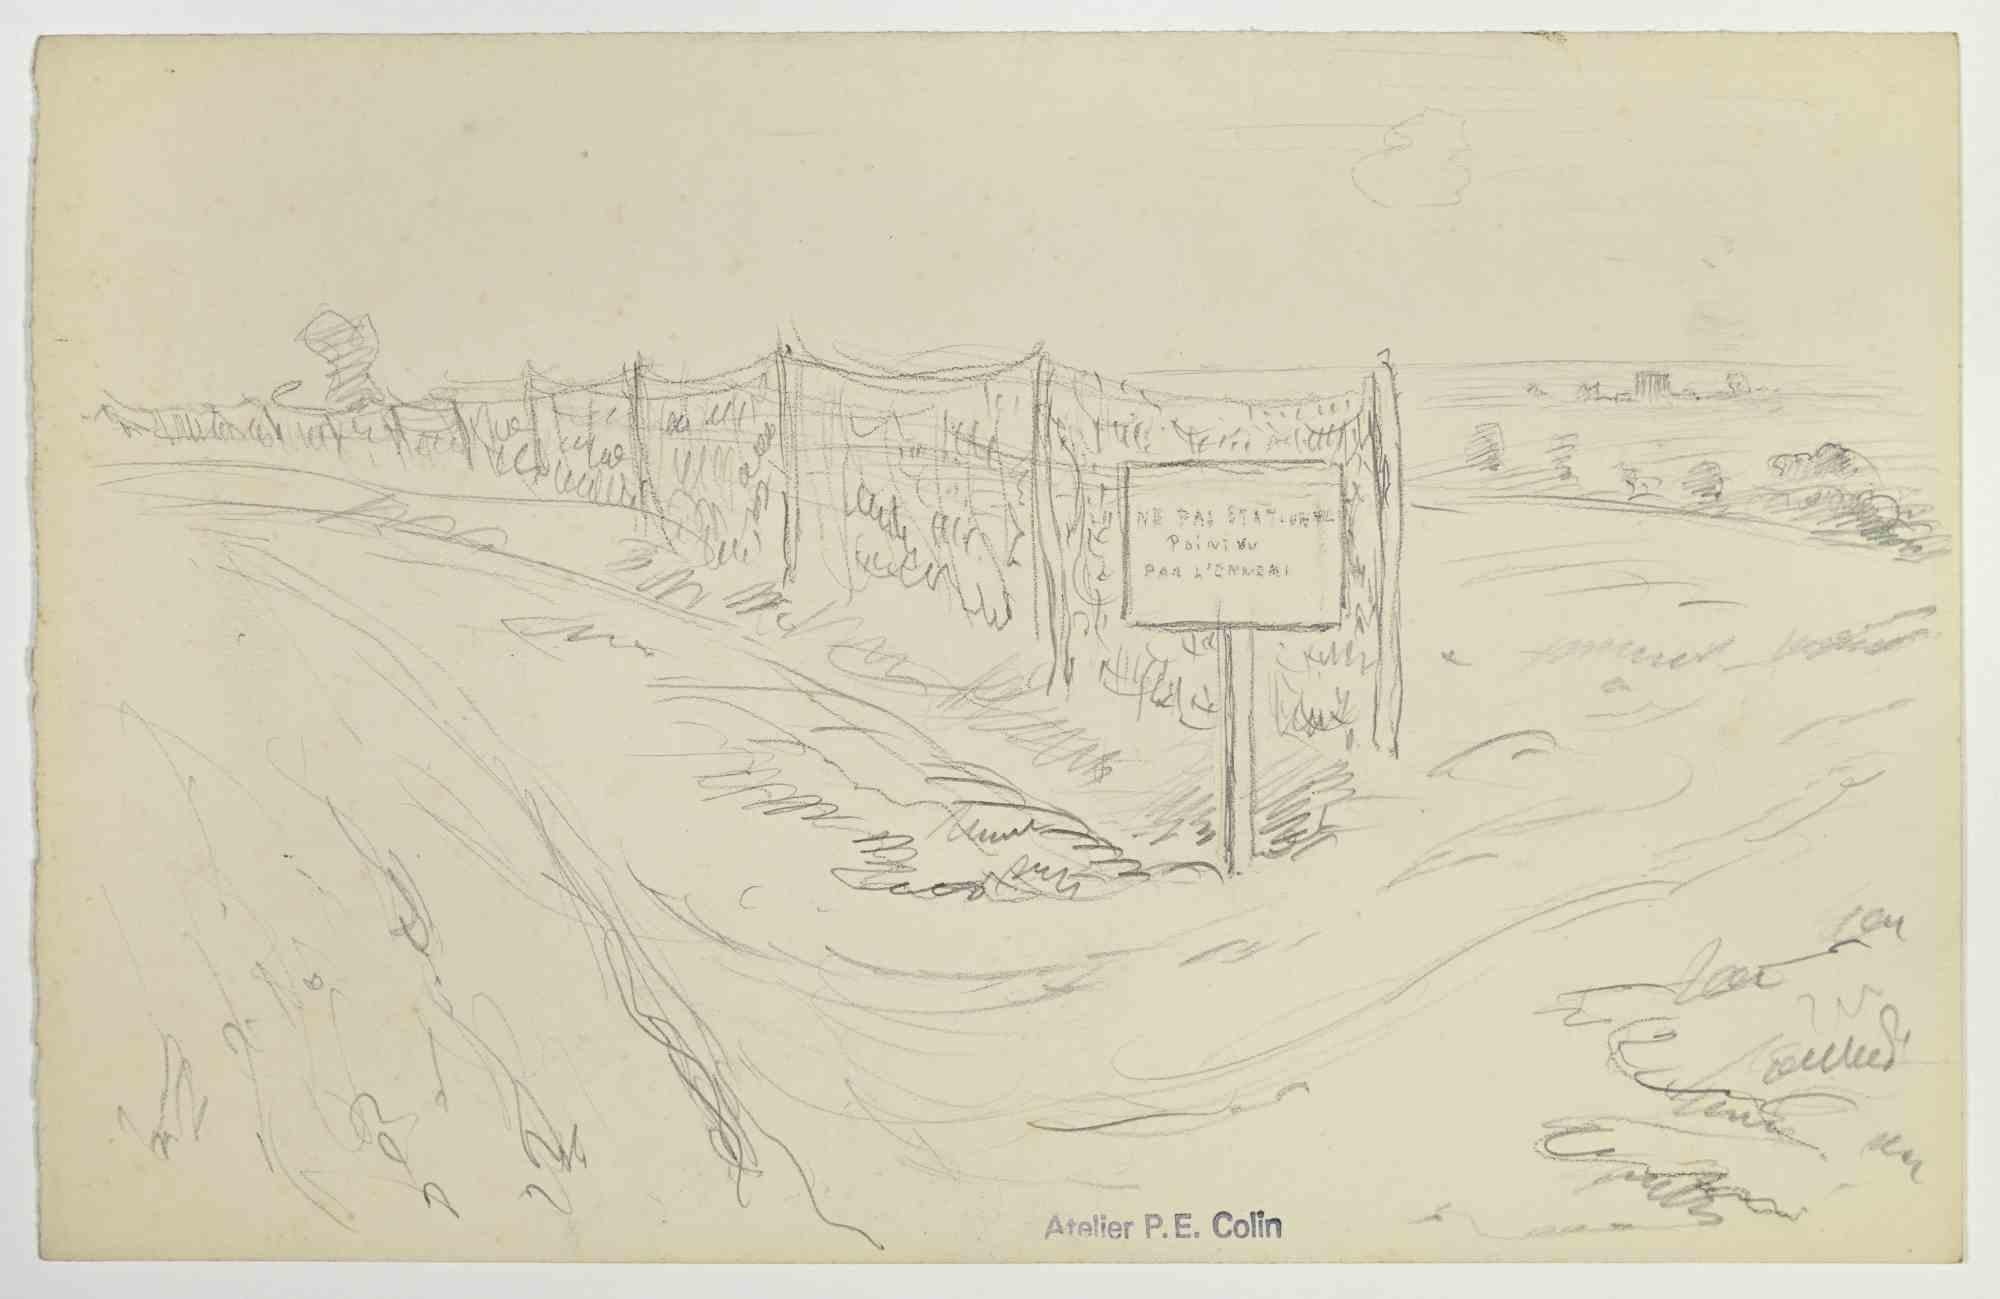 War Zone is a drawing realized by Paul Emile Colin in the Early 20th Century.

Carbon Pencil on ivory-colored paper

Stamped on the lower.

Good conditions with slight foxing.

The artwork is realized through deft expressive strokes.